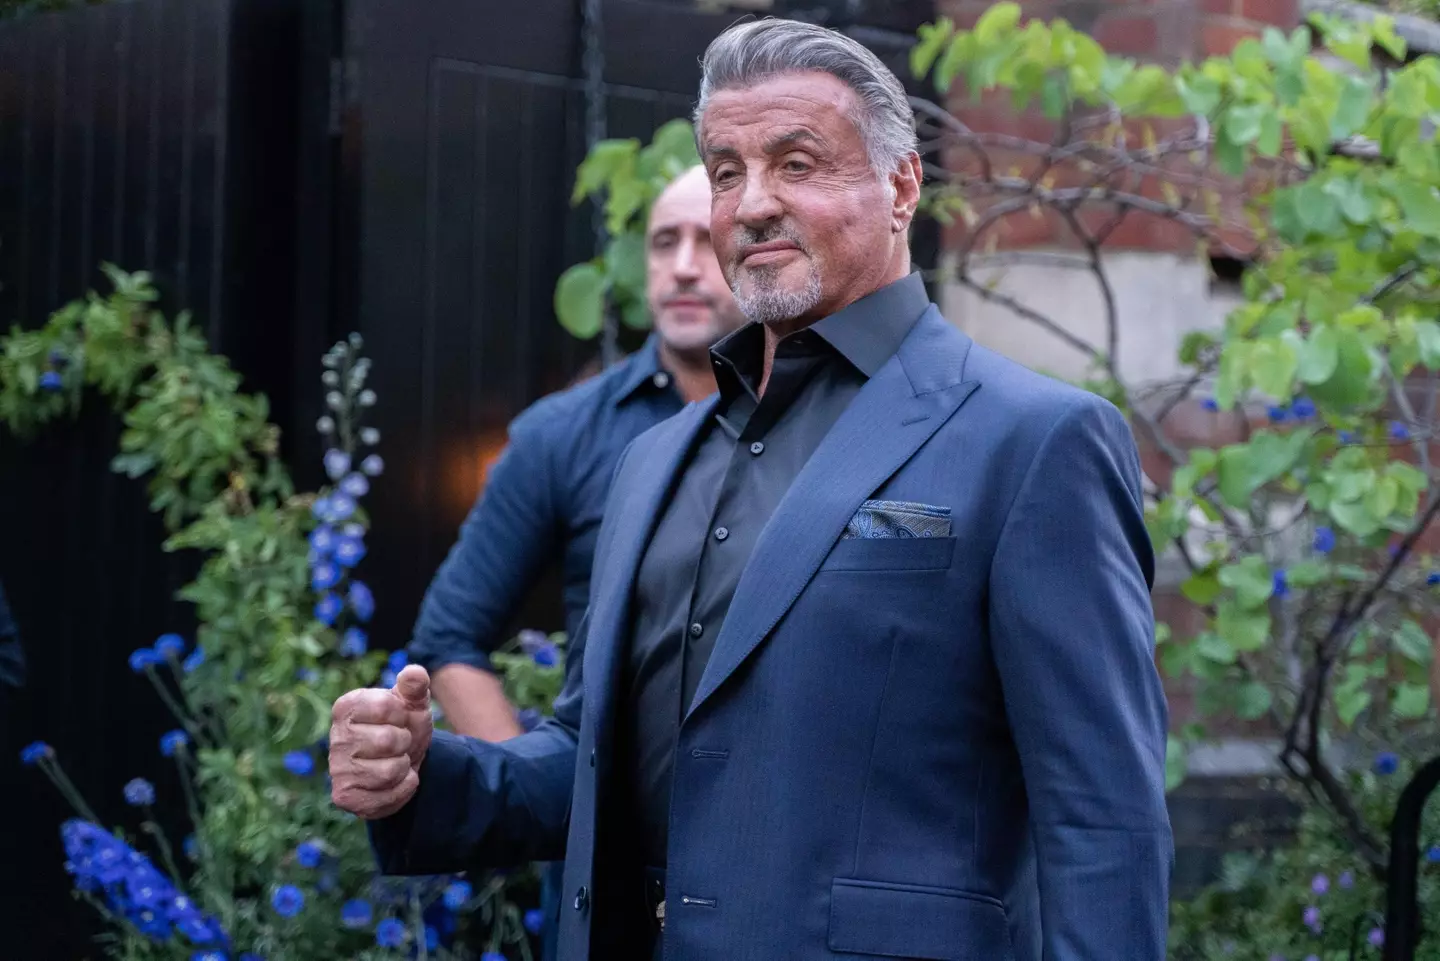 Sylvester Stallone will be starring in a new reality TV show.